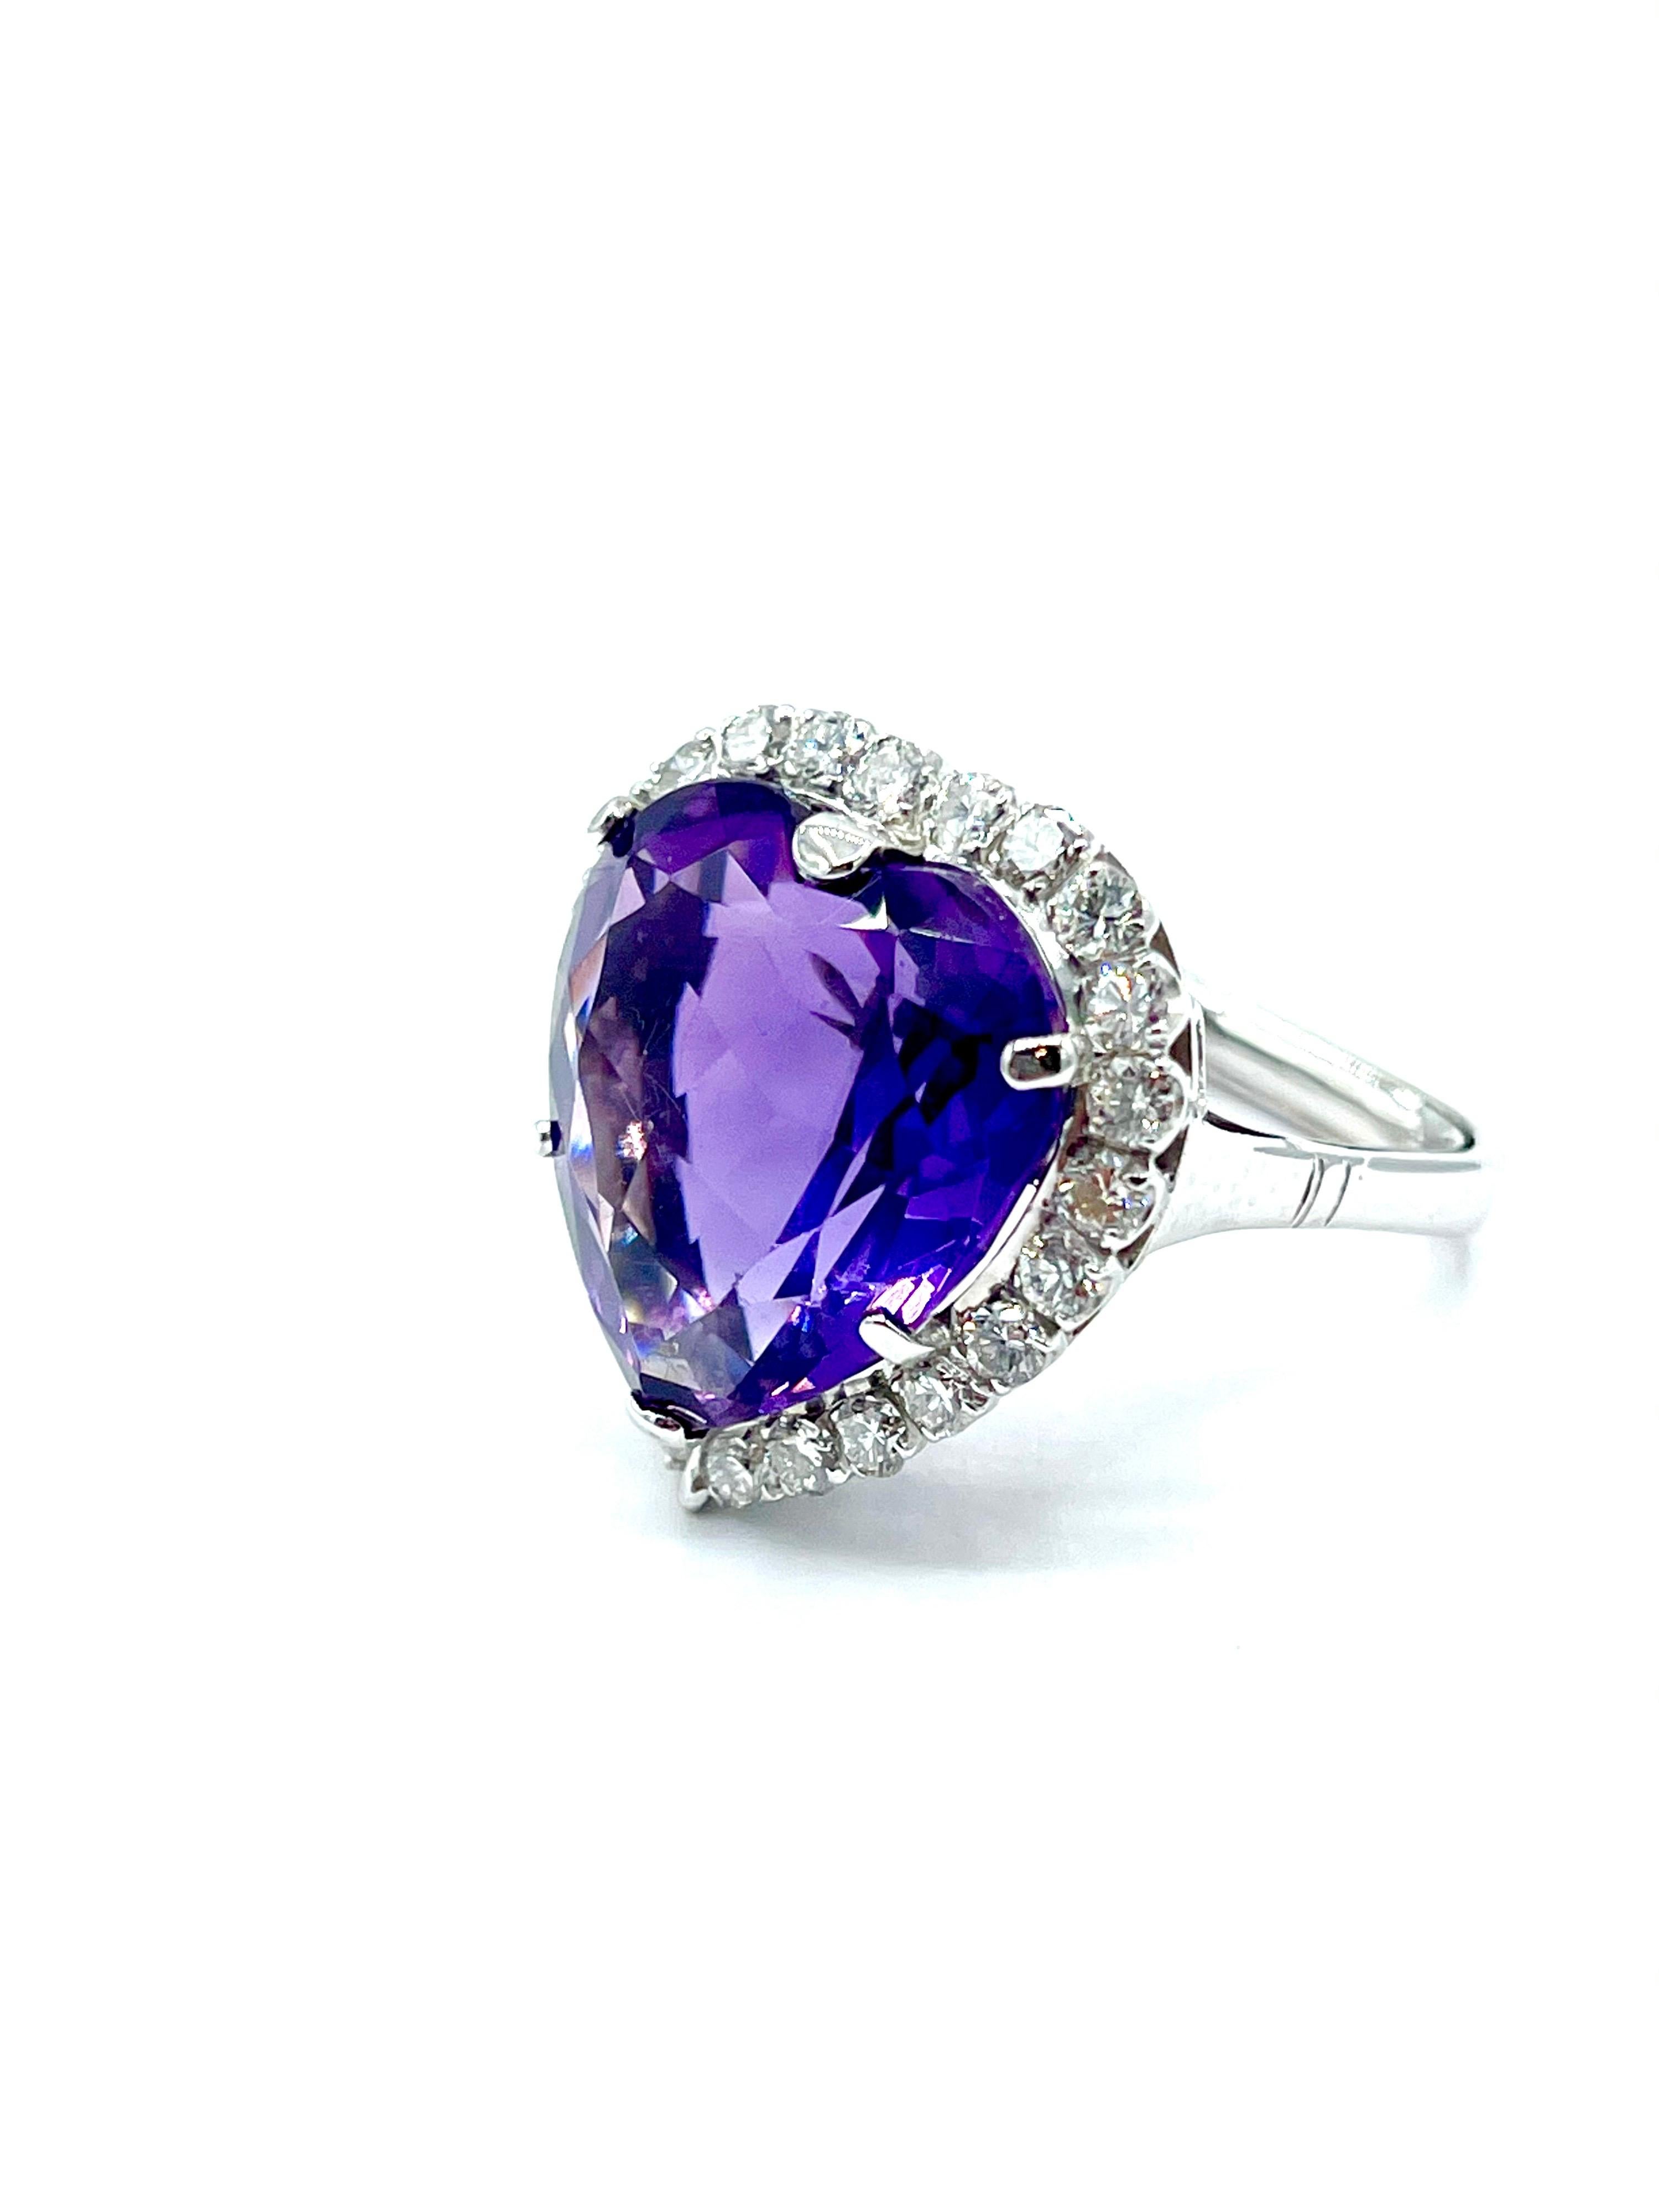 Modern 12.88 Carat Heart Shape Amethyst and Diamond Ring For Sale